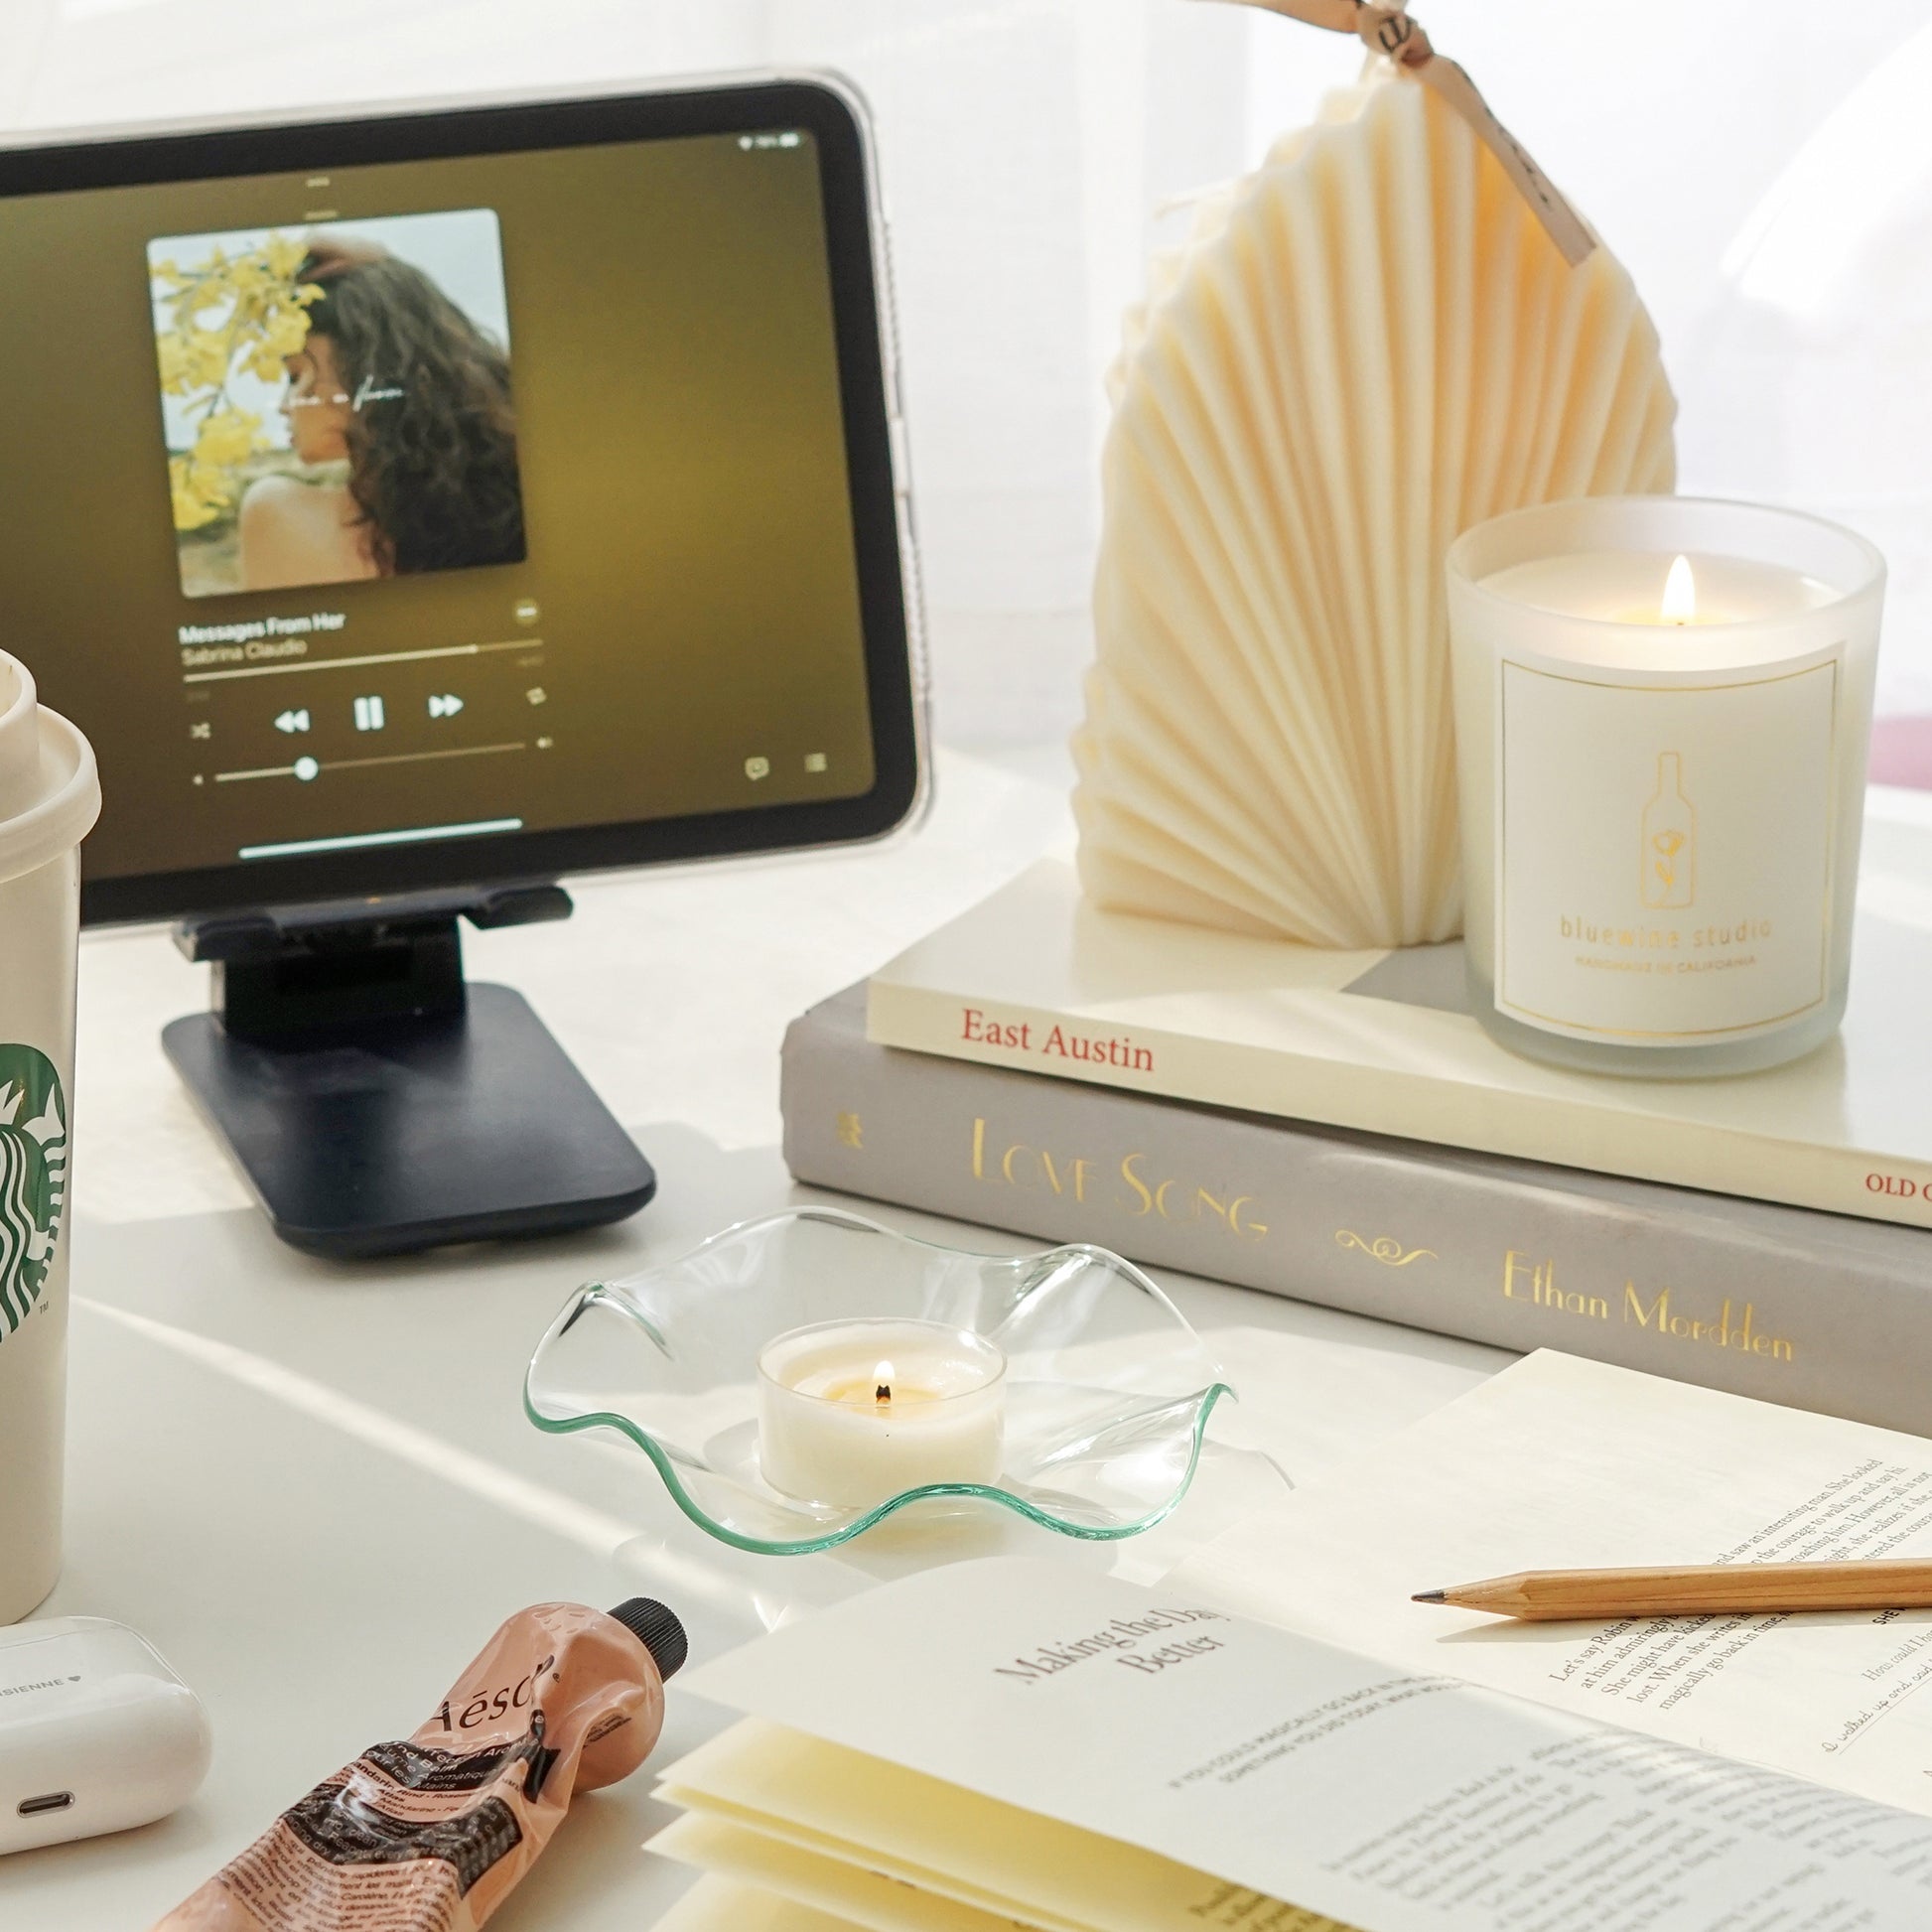 a leaf shape sculptural white natural soy pillar candle and a lit 5oz frosted glass container candle on book stacks, ipad mini playing music messages from her by sabrina claudio, the five minute journal with pages open, a lit tealight candle on a clear wavy ruffle dish, aesop hand lotion, airpods, and starbucks tumbler